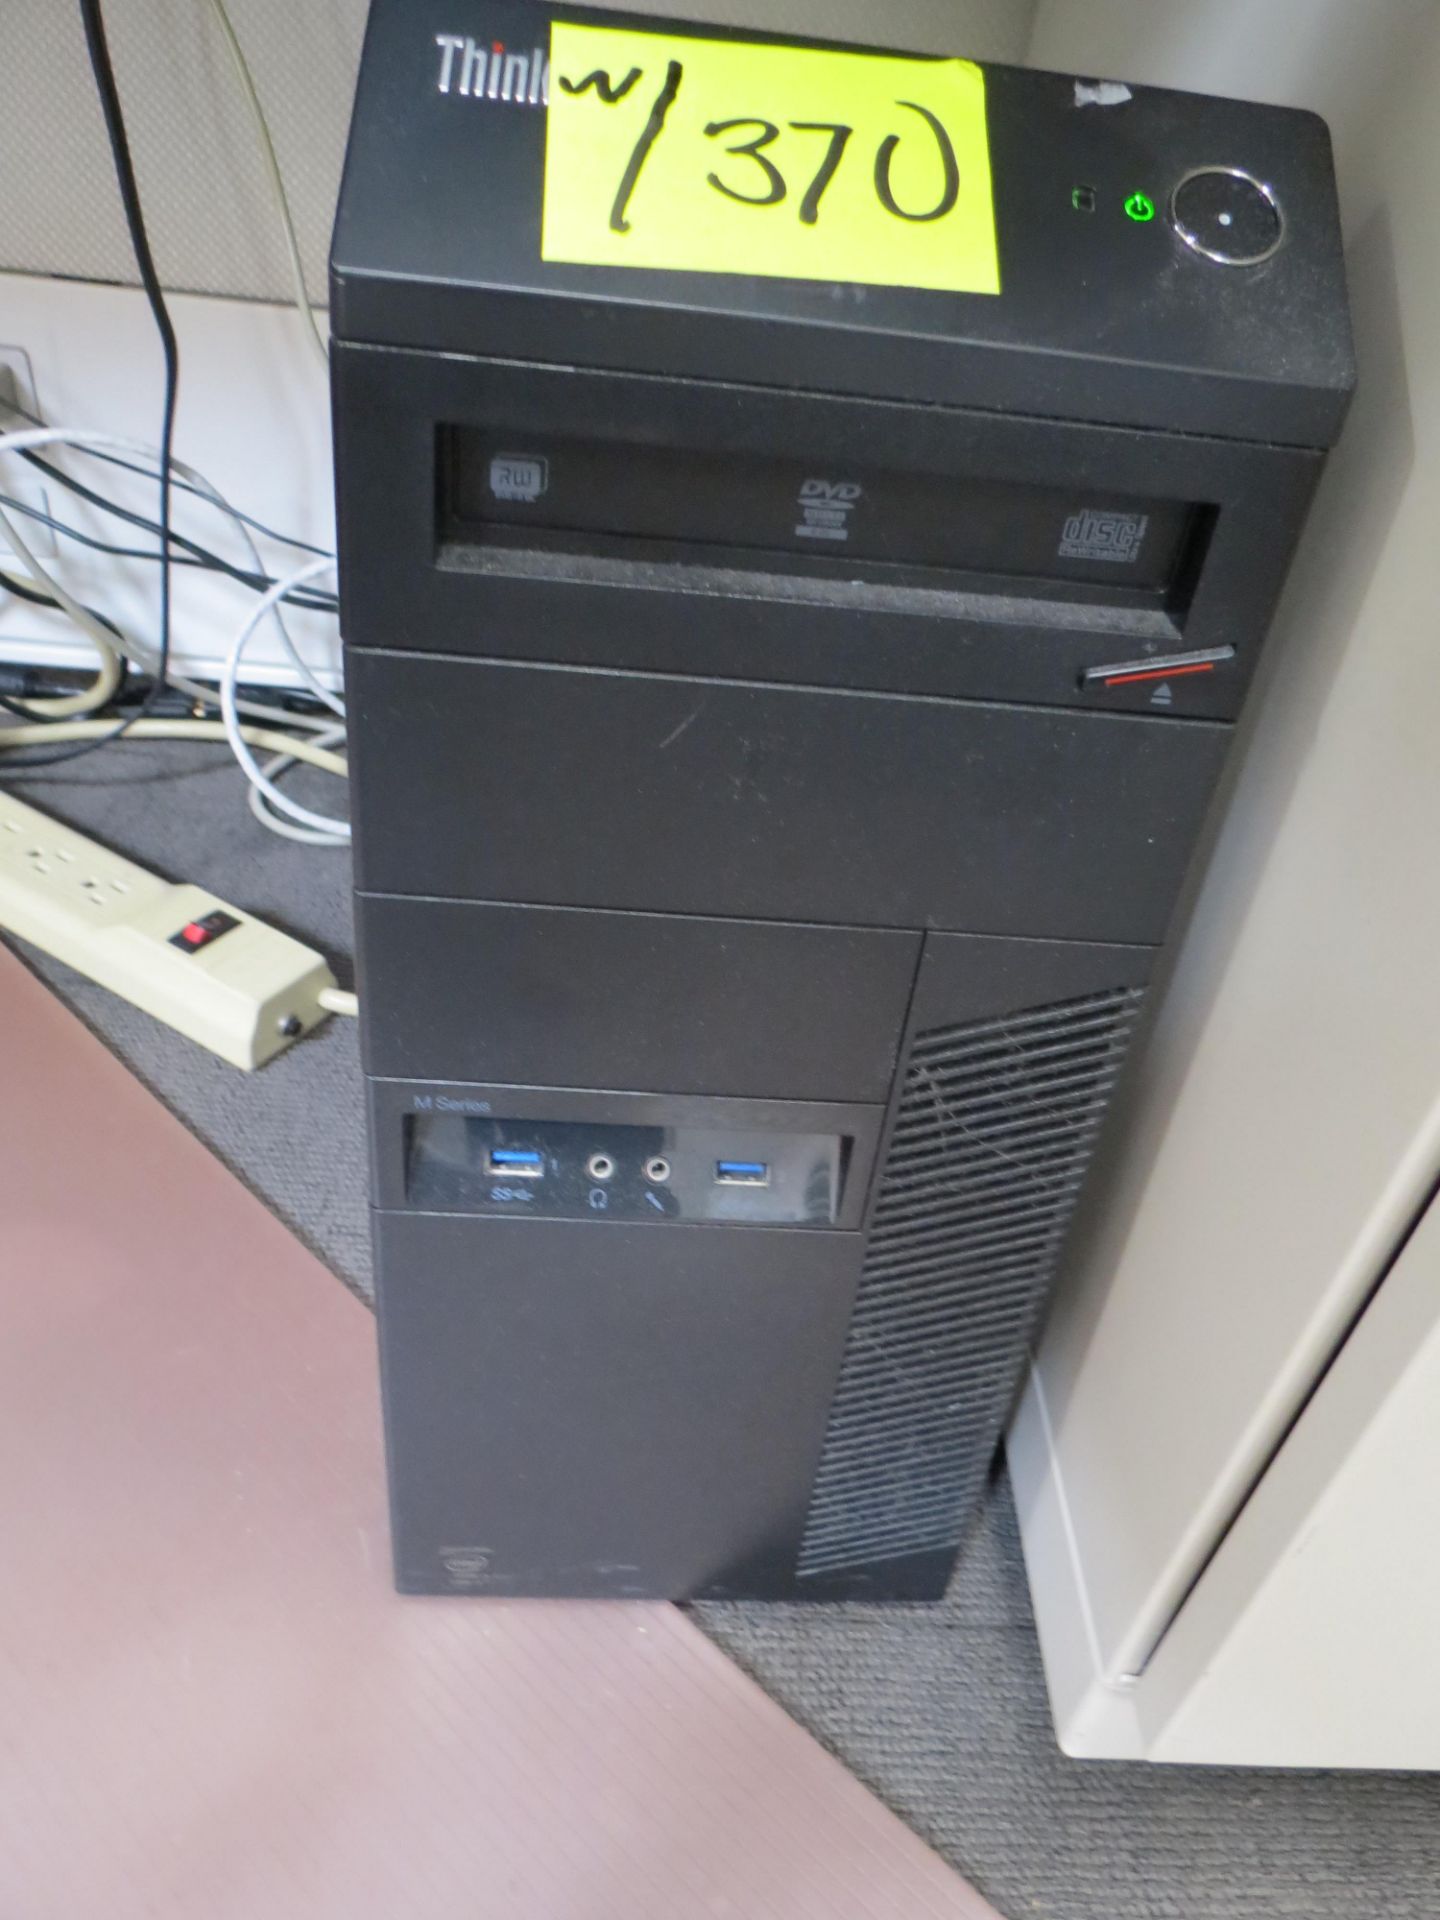 2 LENOVO THINKCENTRE TOWER DESKTOPS, P-TOUCH QL-500 & BROTHER LABEL PRINTERS, 4 MONITORS, - Image 2 of 8